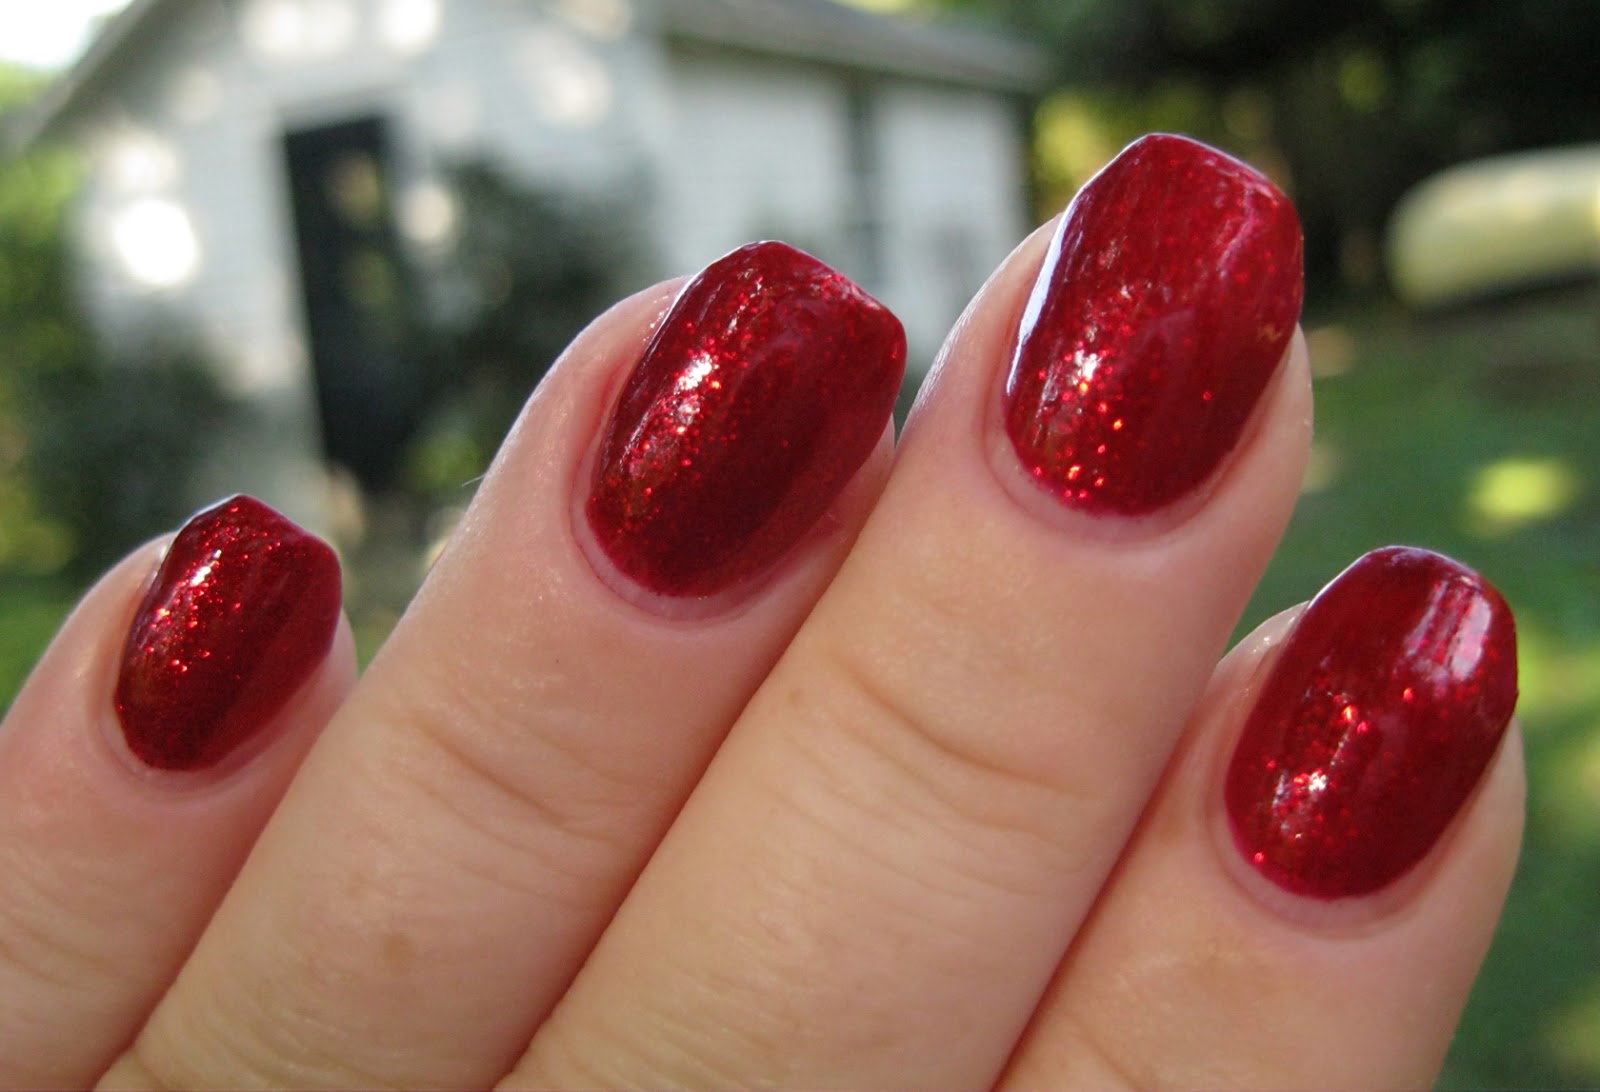 4. China Glaze Nail Lacquer in "Ruby Pumps" - wide 9